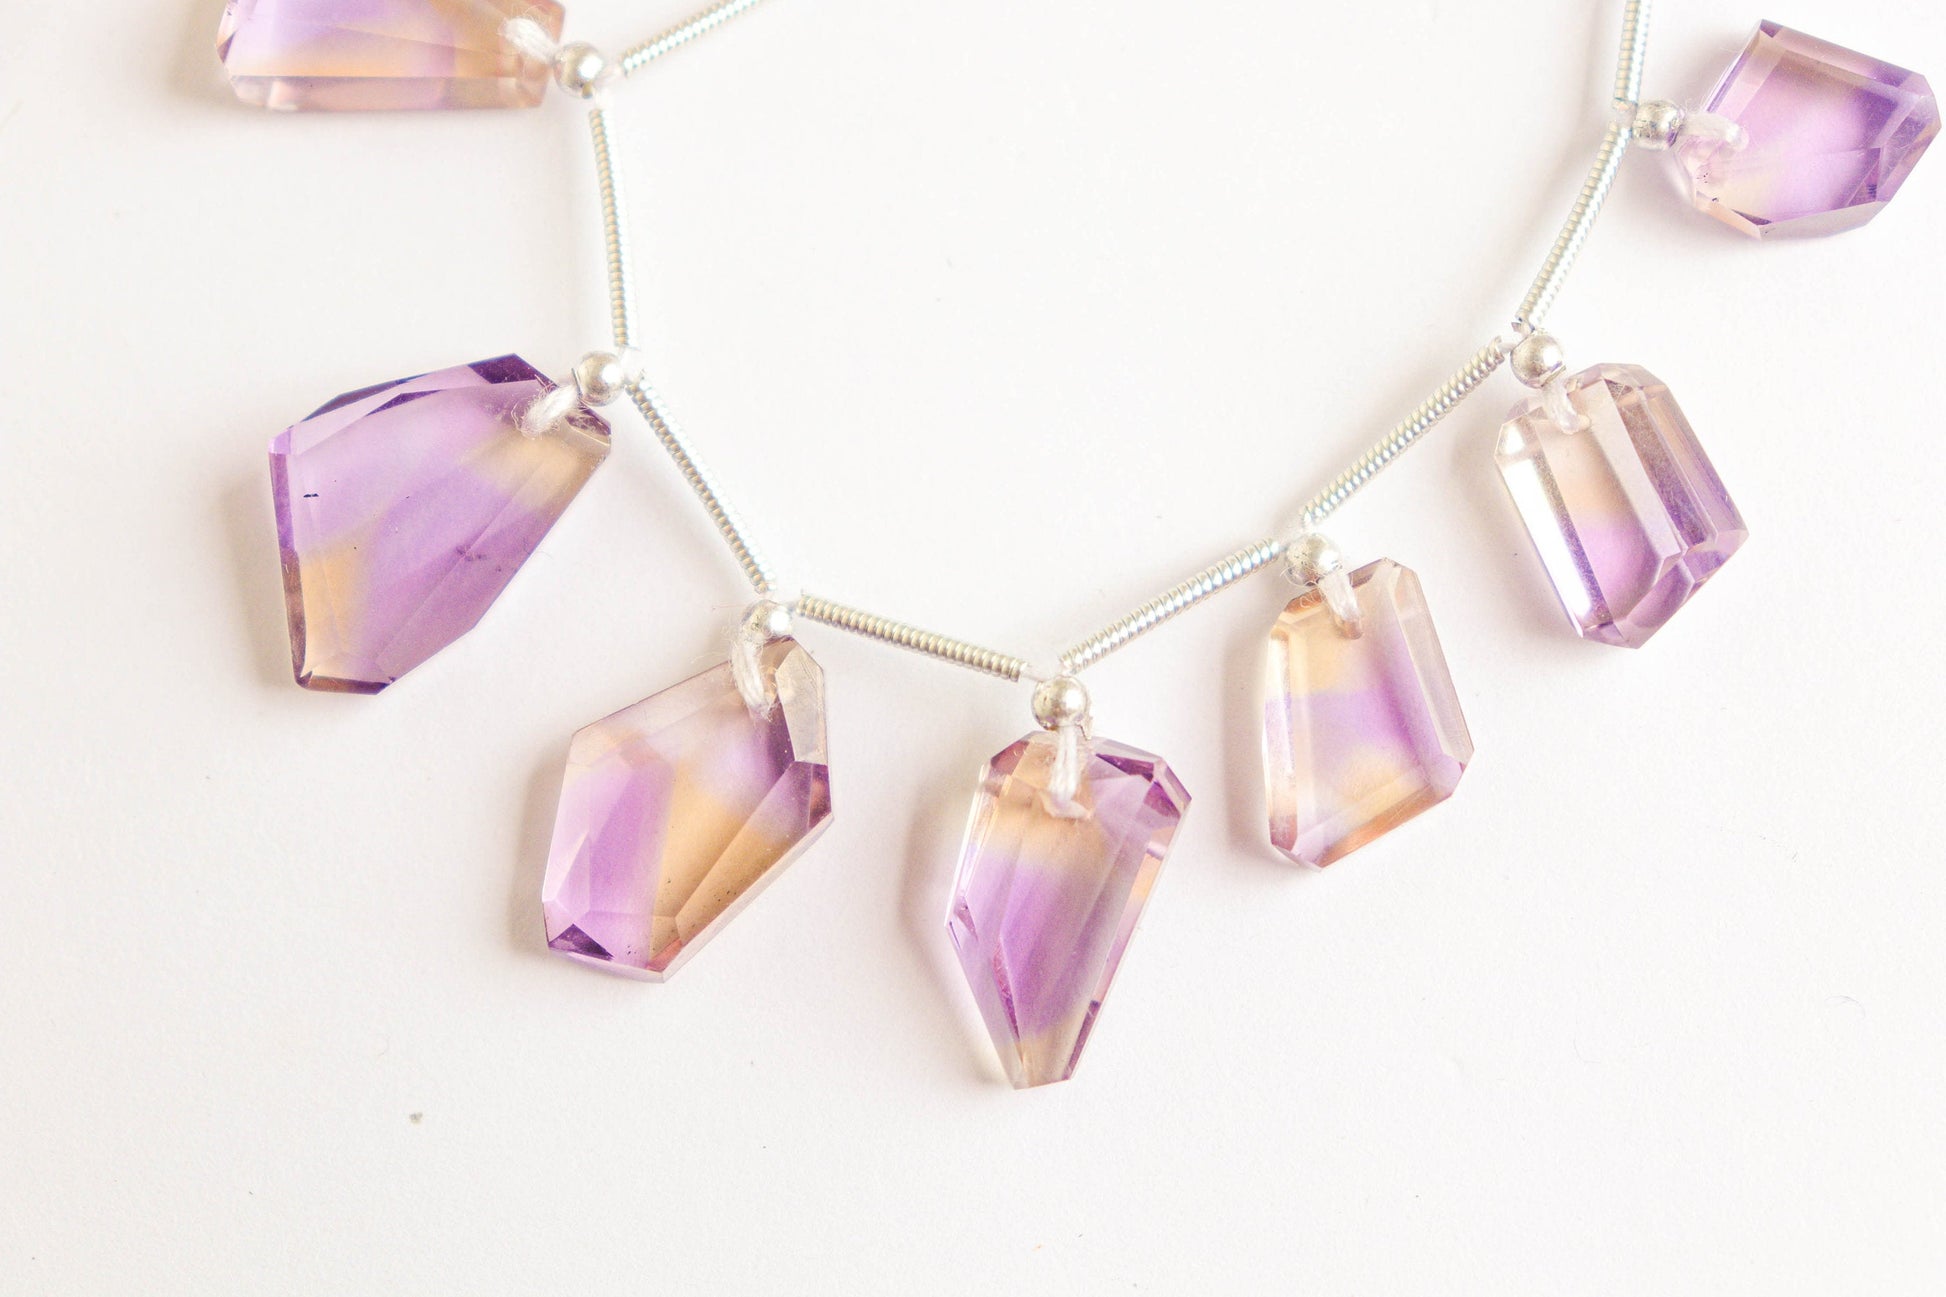 Natural Ametrine Beads Uneven Shape Faceted Tumbles | 10x12mm - 14x18mm | 10 Pieces | 7 inch | High Quality Ametrine | Beadsforyourjewellery Beadsforyourjewelry